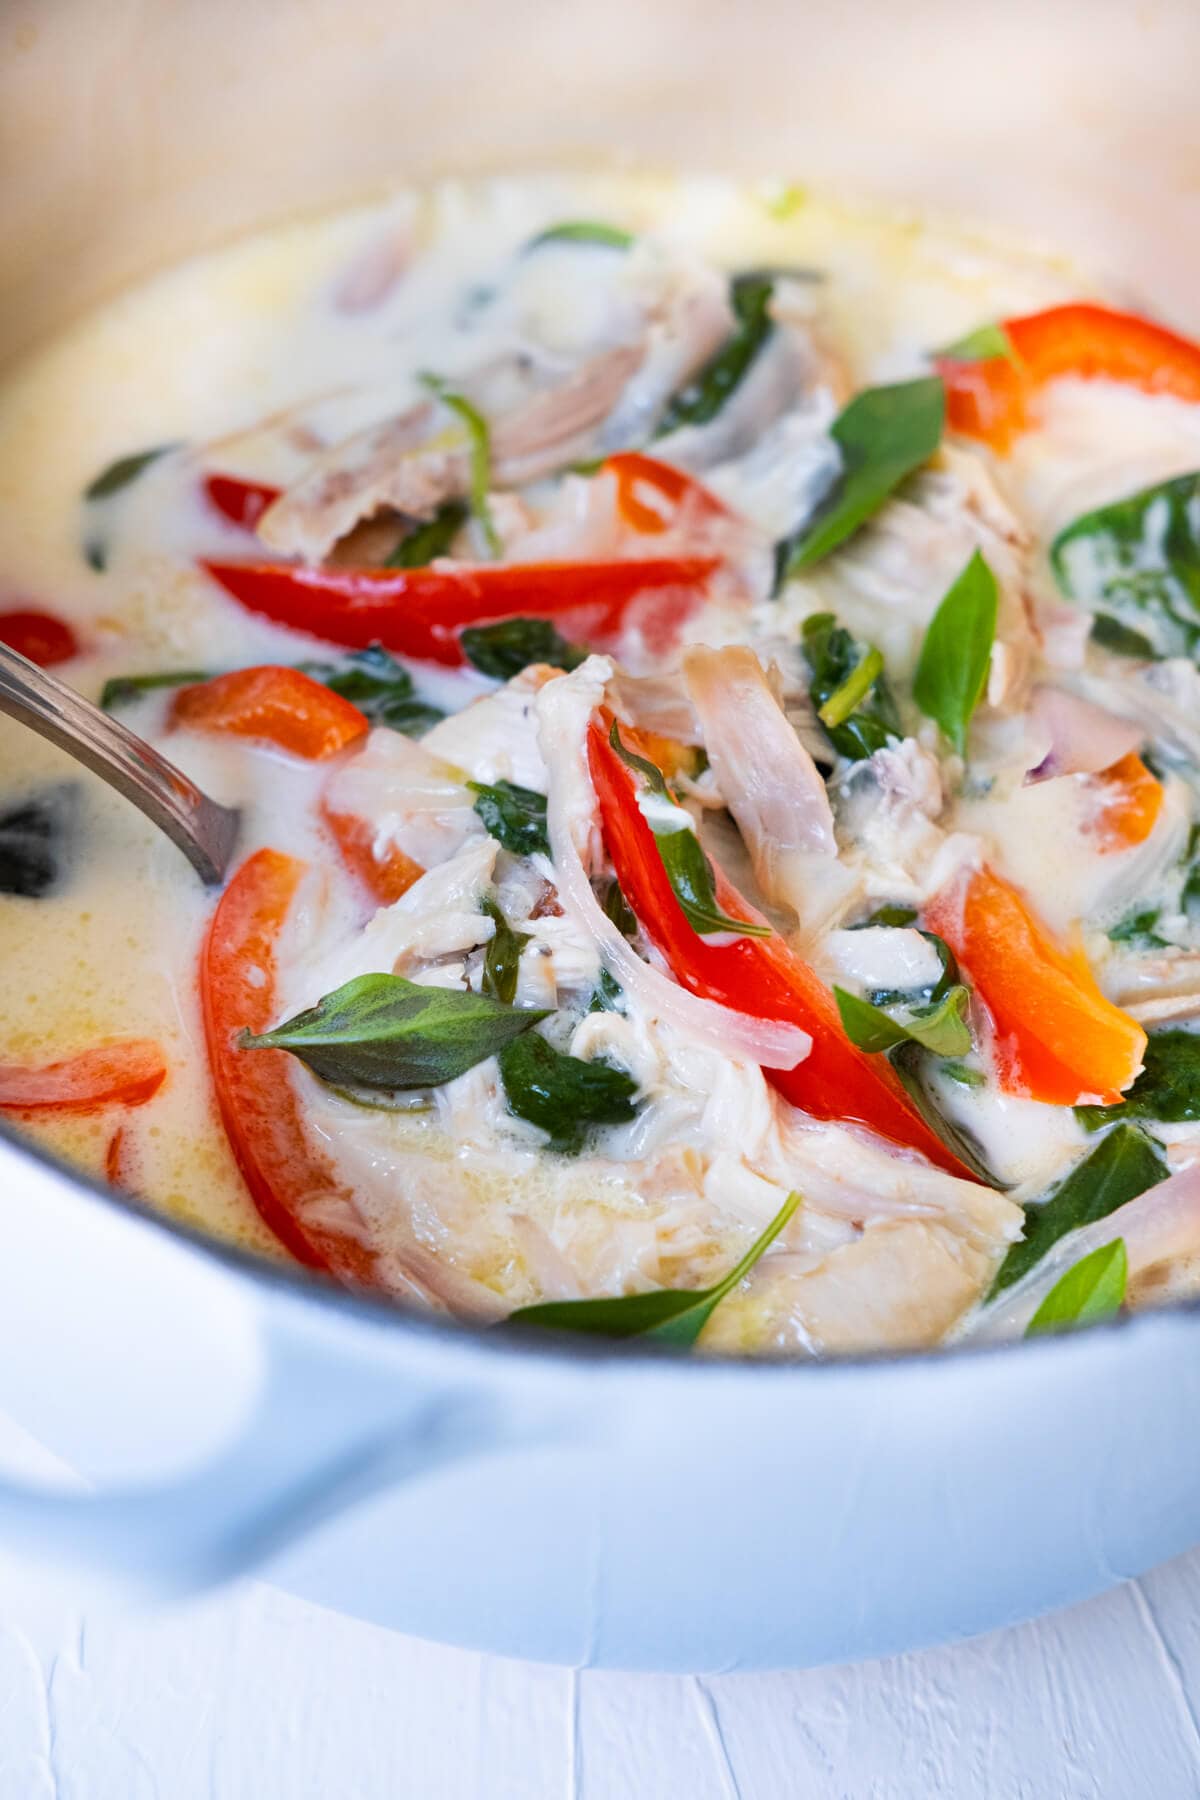 Stew in a pot with coconut milk, chicken, red bell pepper, baby spinach leaves and basil leaves on top.